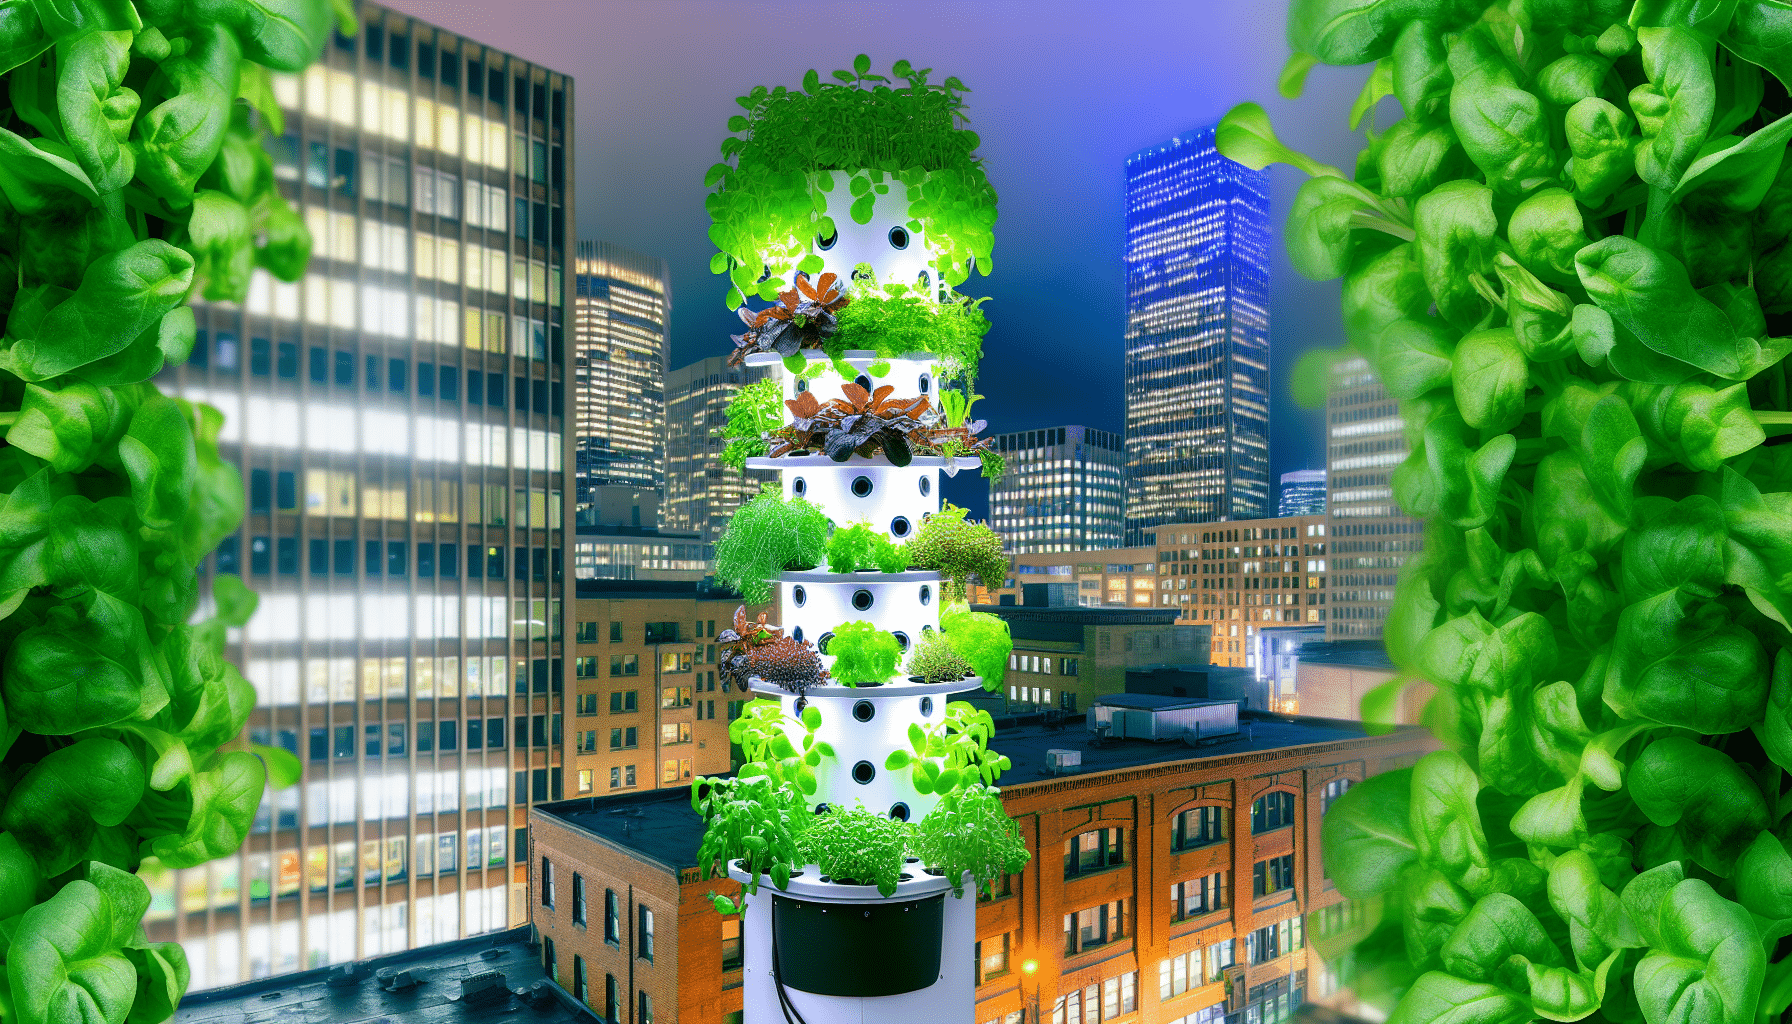 Environmental benefits of aeroponic tower with LED lights